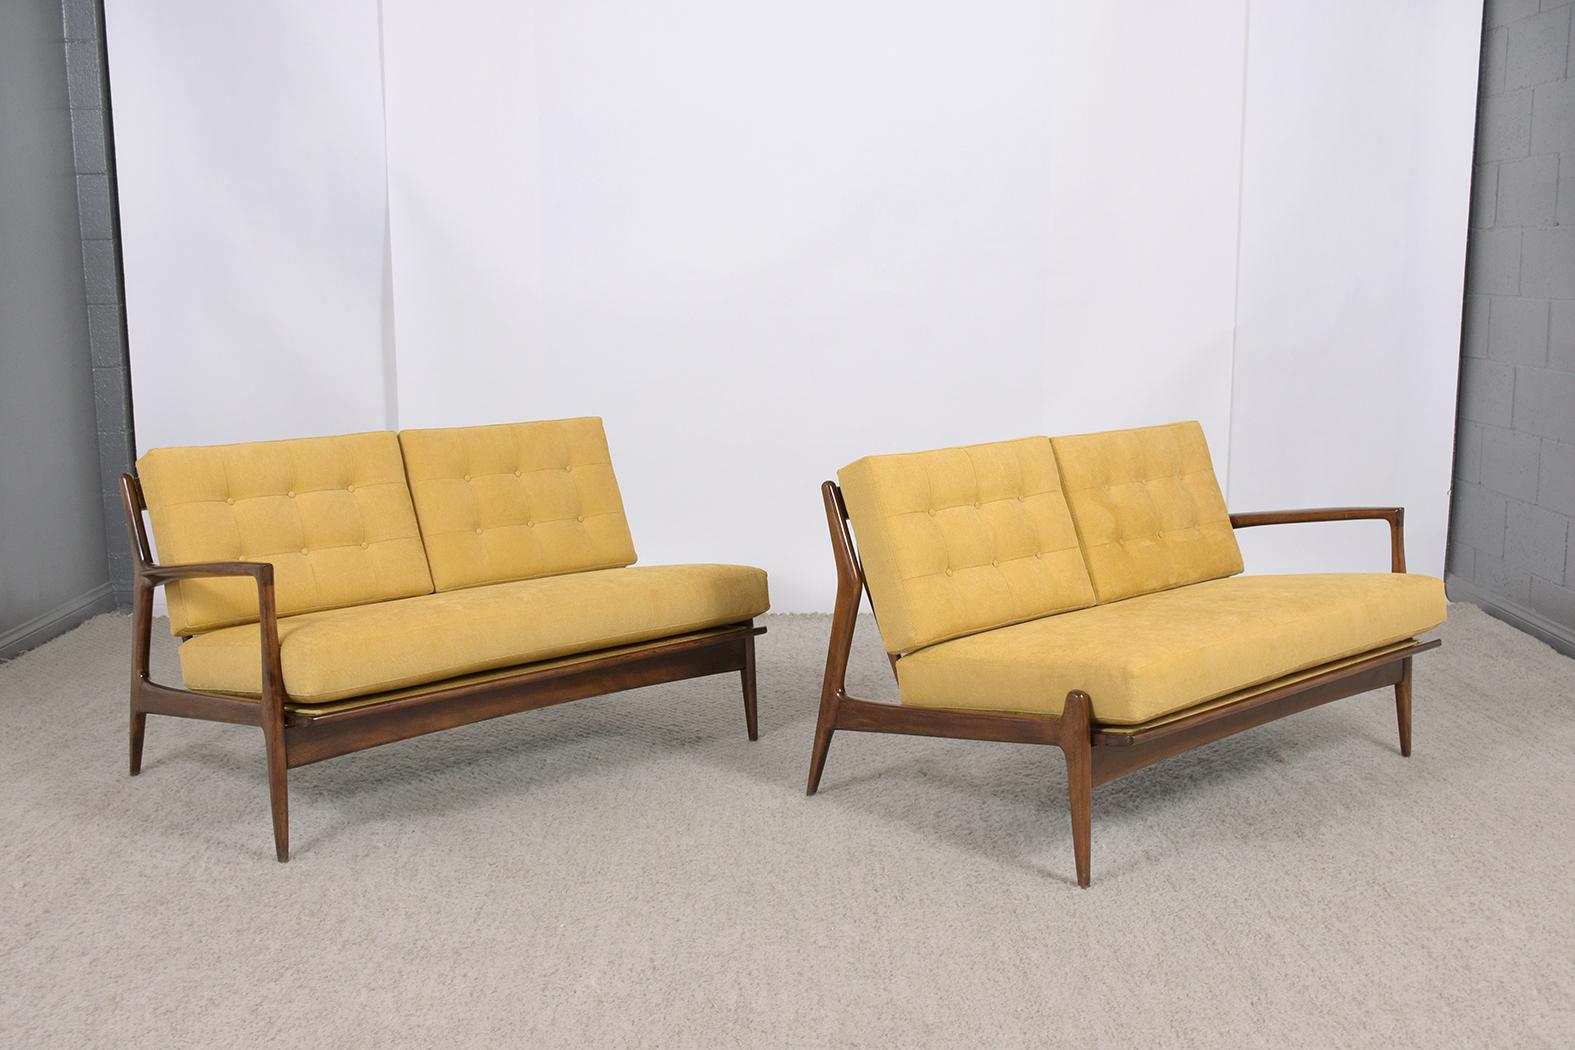 Step into the world of 1960s Scandinavian design with our extraordinary mid-century modern Danish sectional sofa. This vintage sofa, expertly handcrafted from teak wood, stands as a testament to the era's unmatched craftsmanship and style. Our